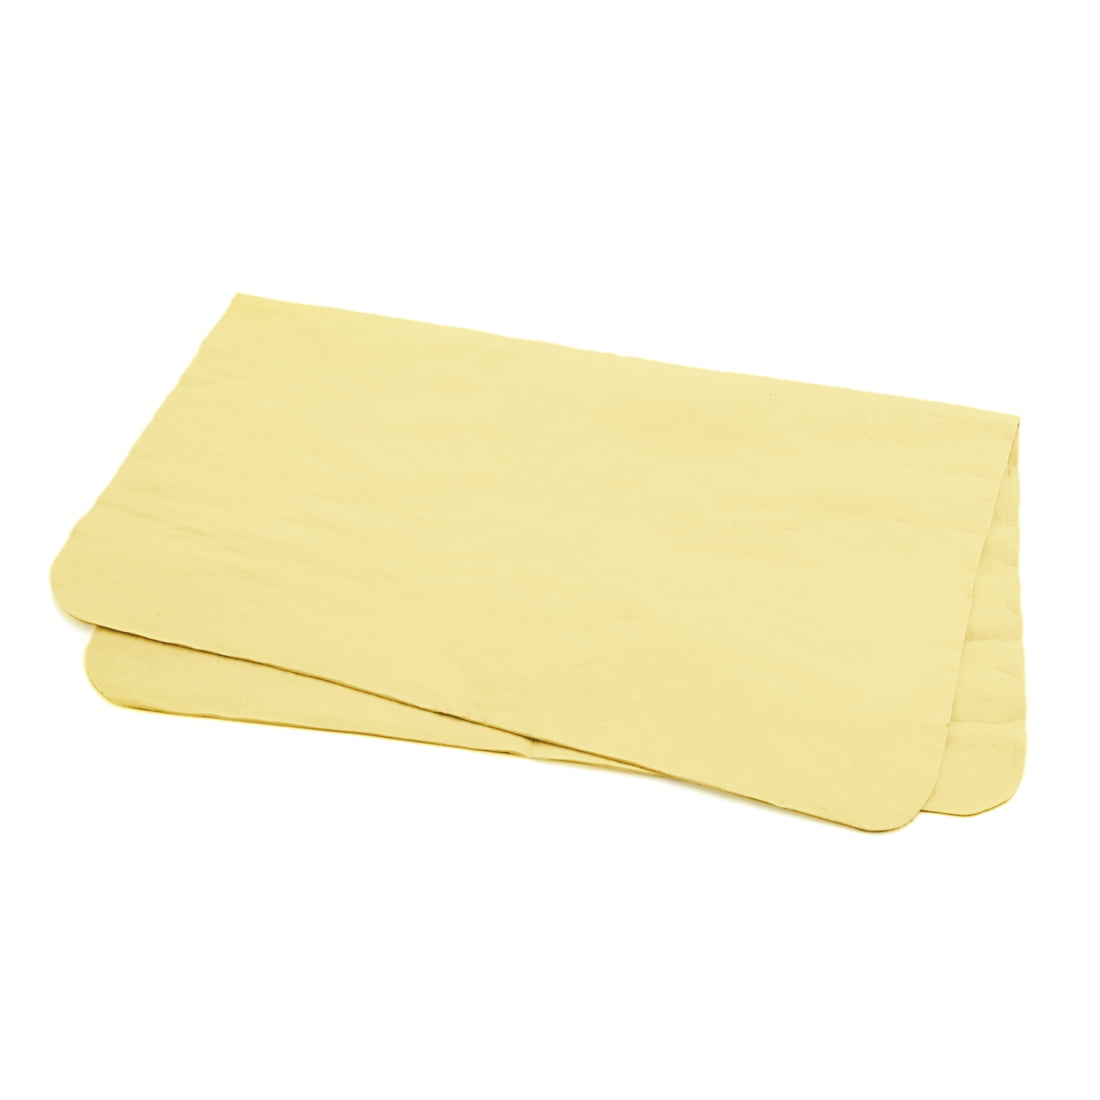 60x80cm Natural Chamois Leather Car Drying Towel Shammy Cleaning Cloth Absorbent 